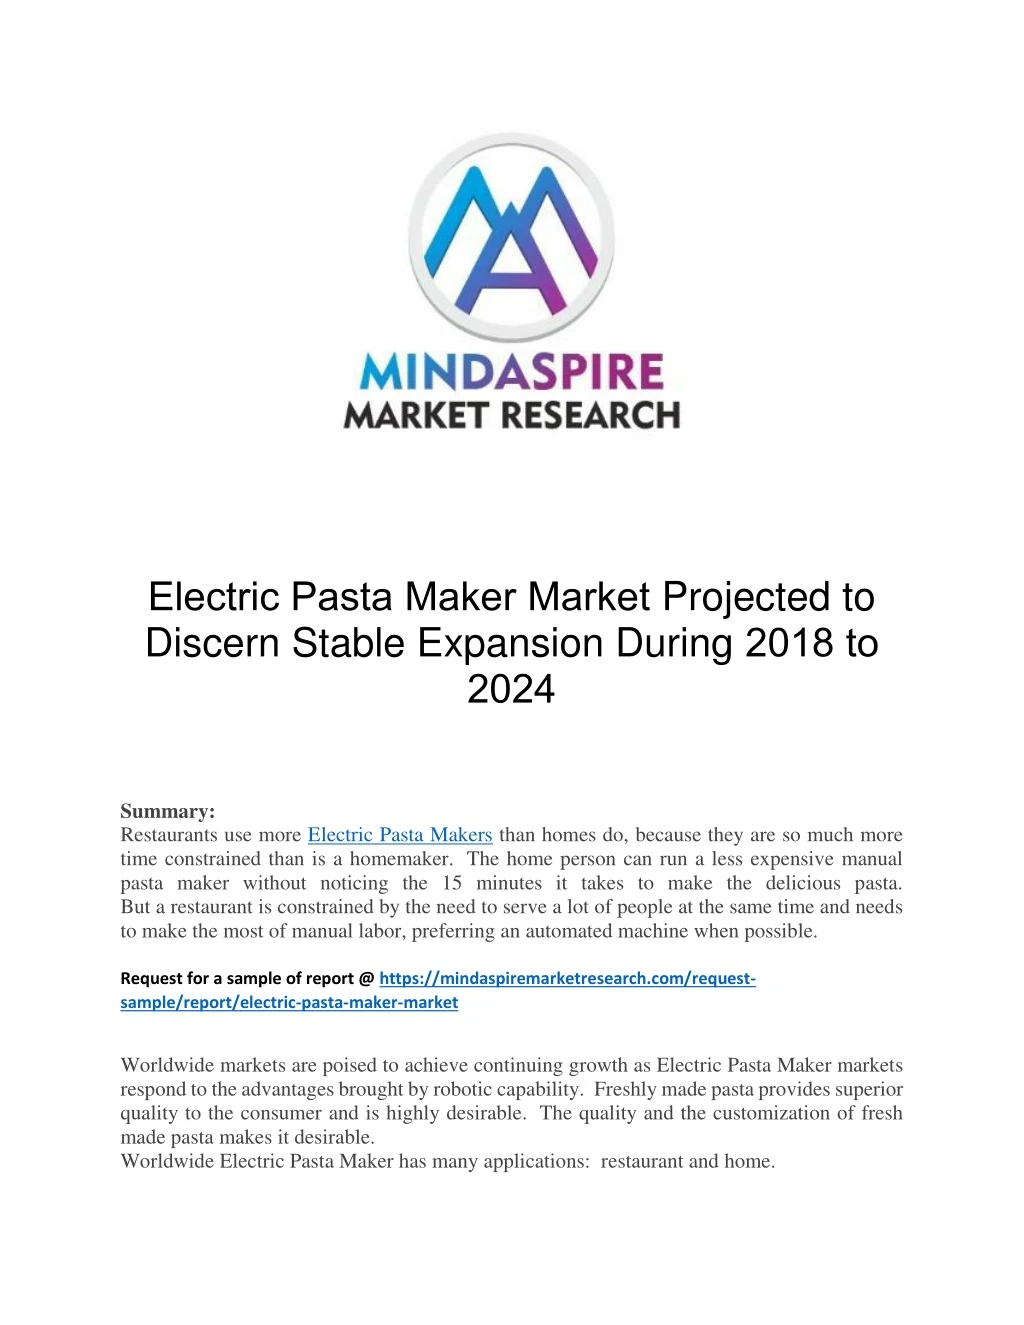 electric pasta maker market projected to discern